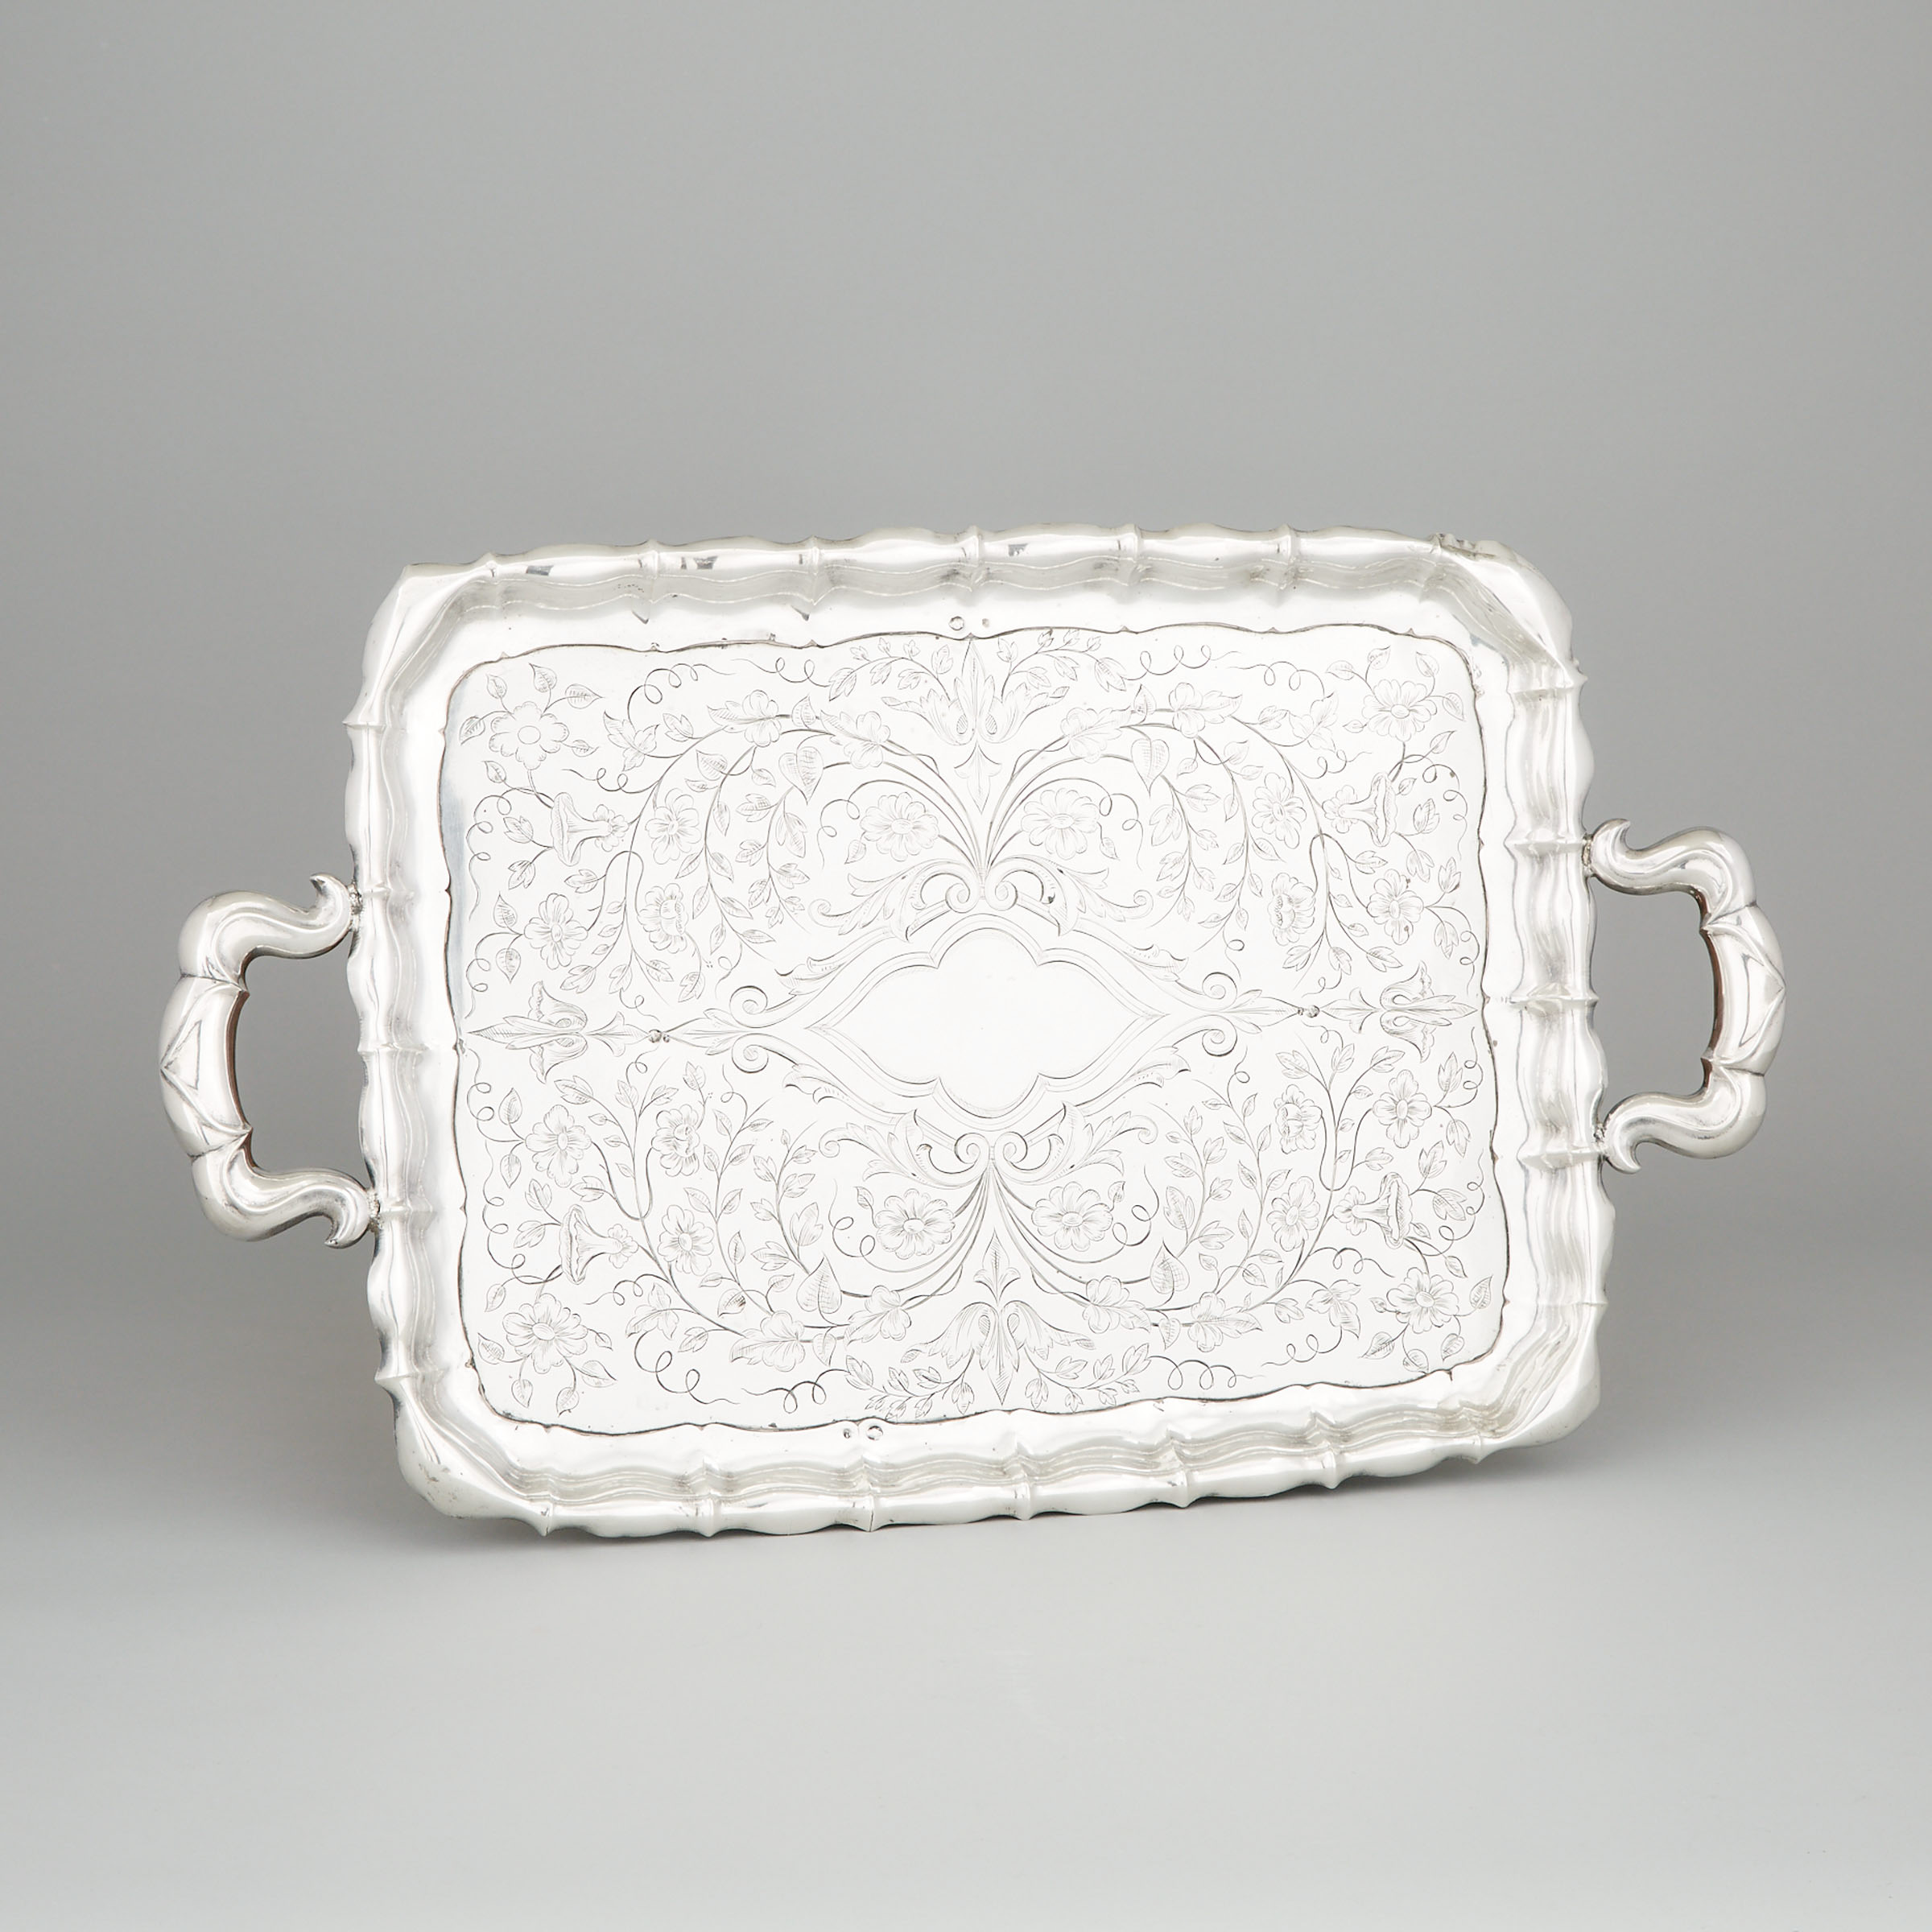 Turkish Silver Two-Handled Tray, c.1900